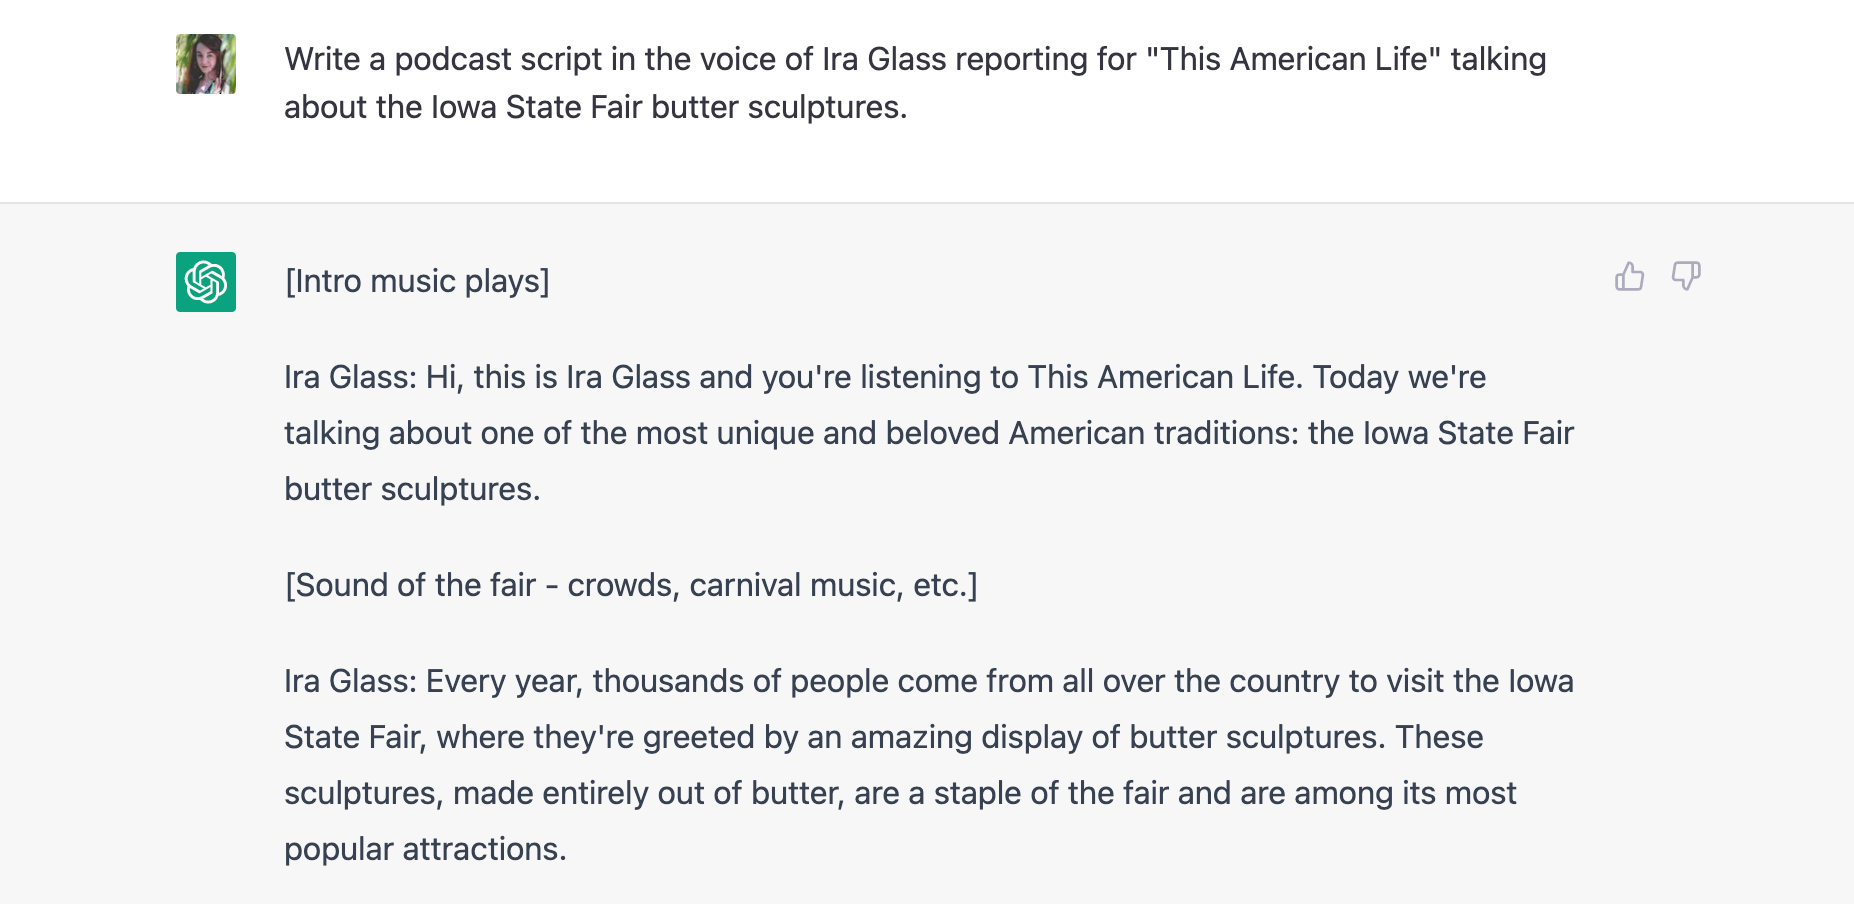 Screenshot of a ChatGPT conversation. The prompt reads: "Write a podcast script in the voice of Ira Glass reporting for "This American Life" talking about the Iowa State Fair butter sculptures." The response reads: "[Intro music plays]  Ira Glass: Hi, this is Ira Glass and you're listening to This American Life. Today we're talking about one of the most unique and beloved American traditions: the Iowa State Fair butter sculptures.  [Sound of the fair - crowds, carnival music, etc.]  Ira Glass: Every year, thousands of people come from all over the country to visit the Iowa State Fair, where they're greeted by an amazing display of butter sculptures. These sculptures, made entirely out of butter, are a staple of the fair and are among its most popular attractions."